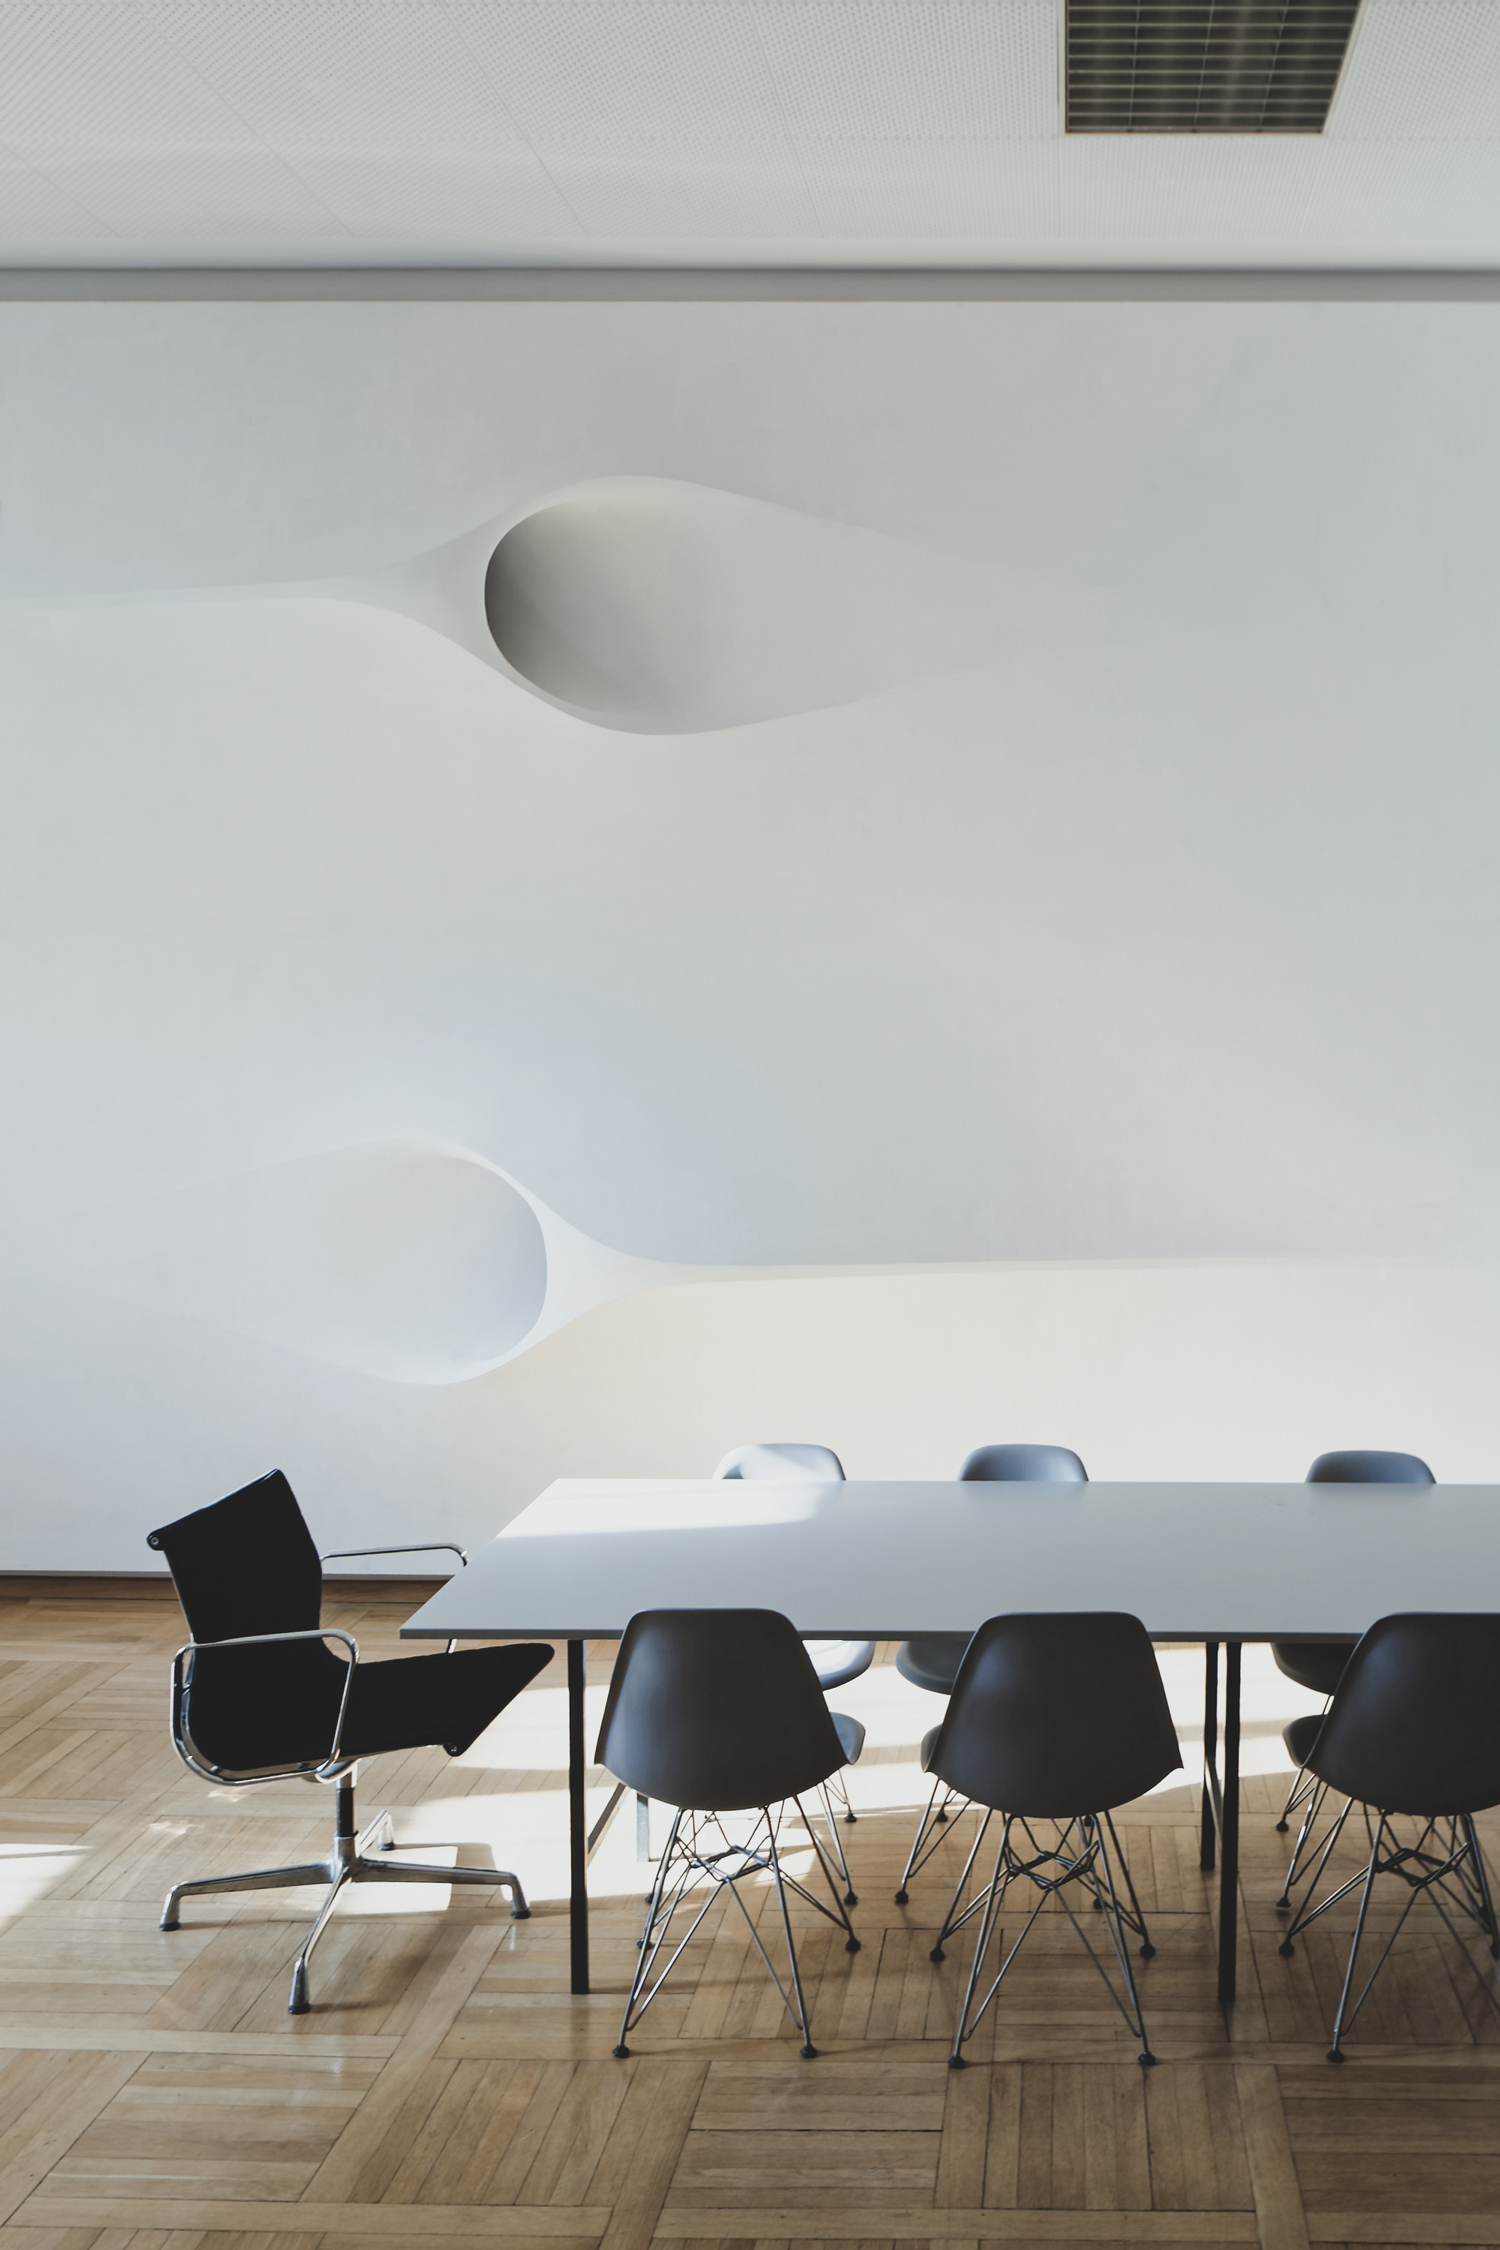 projector-ceiling-moh-architects-joerg-hugo-conferencetable1.jpg